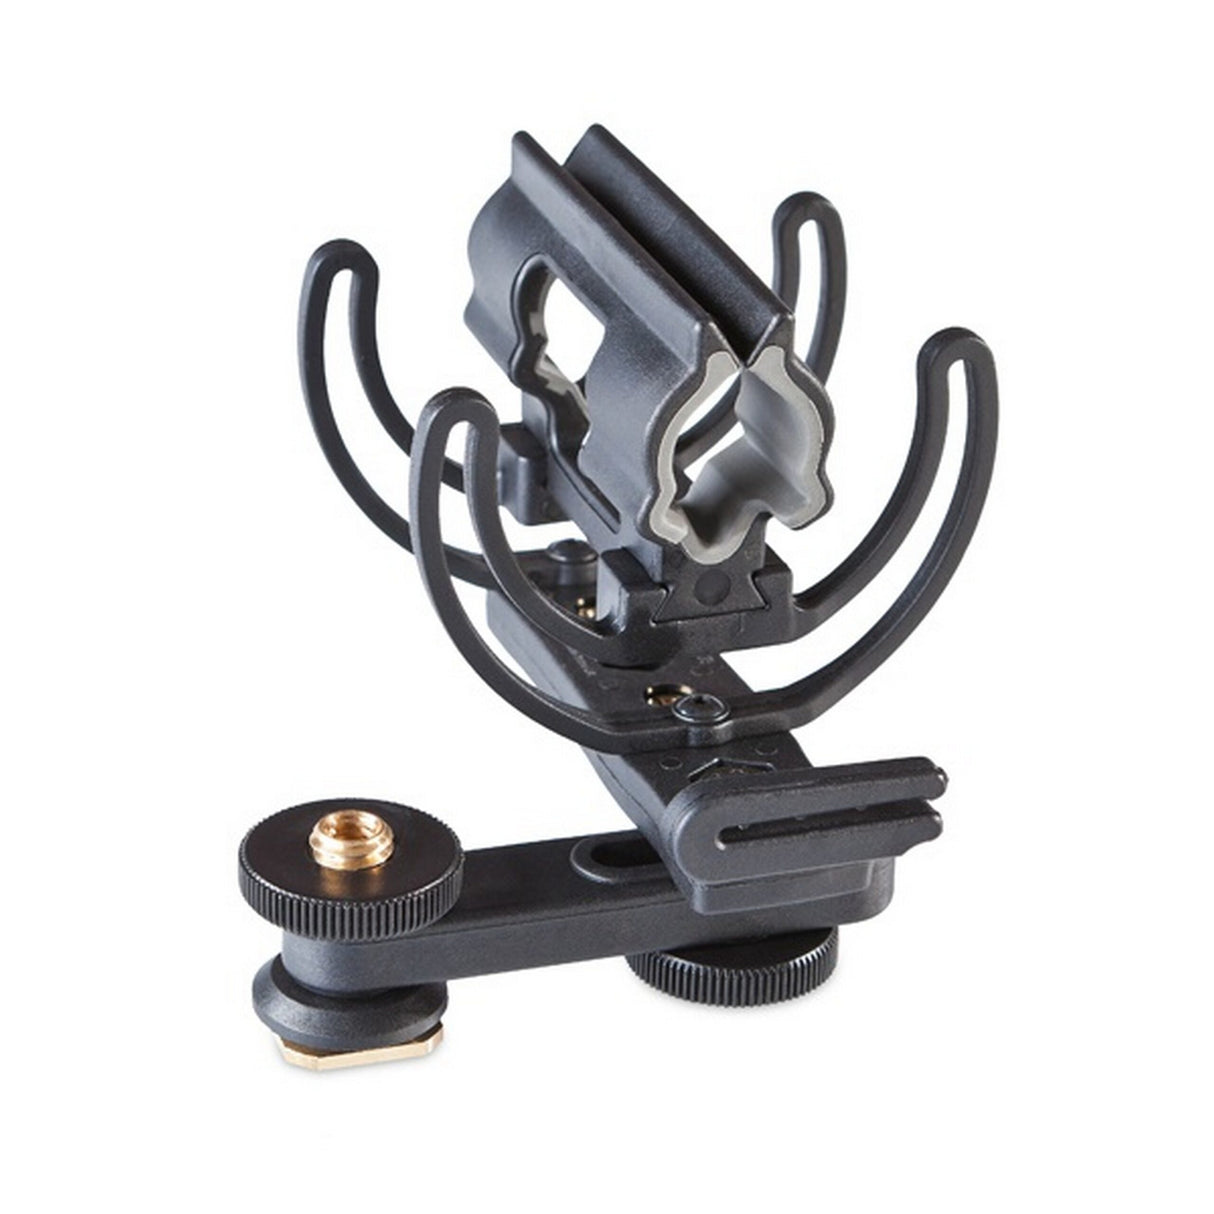 Rycote InVision Video Hot Shoe Mount